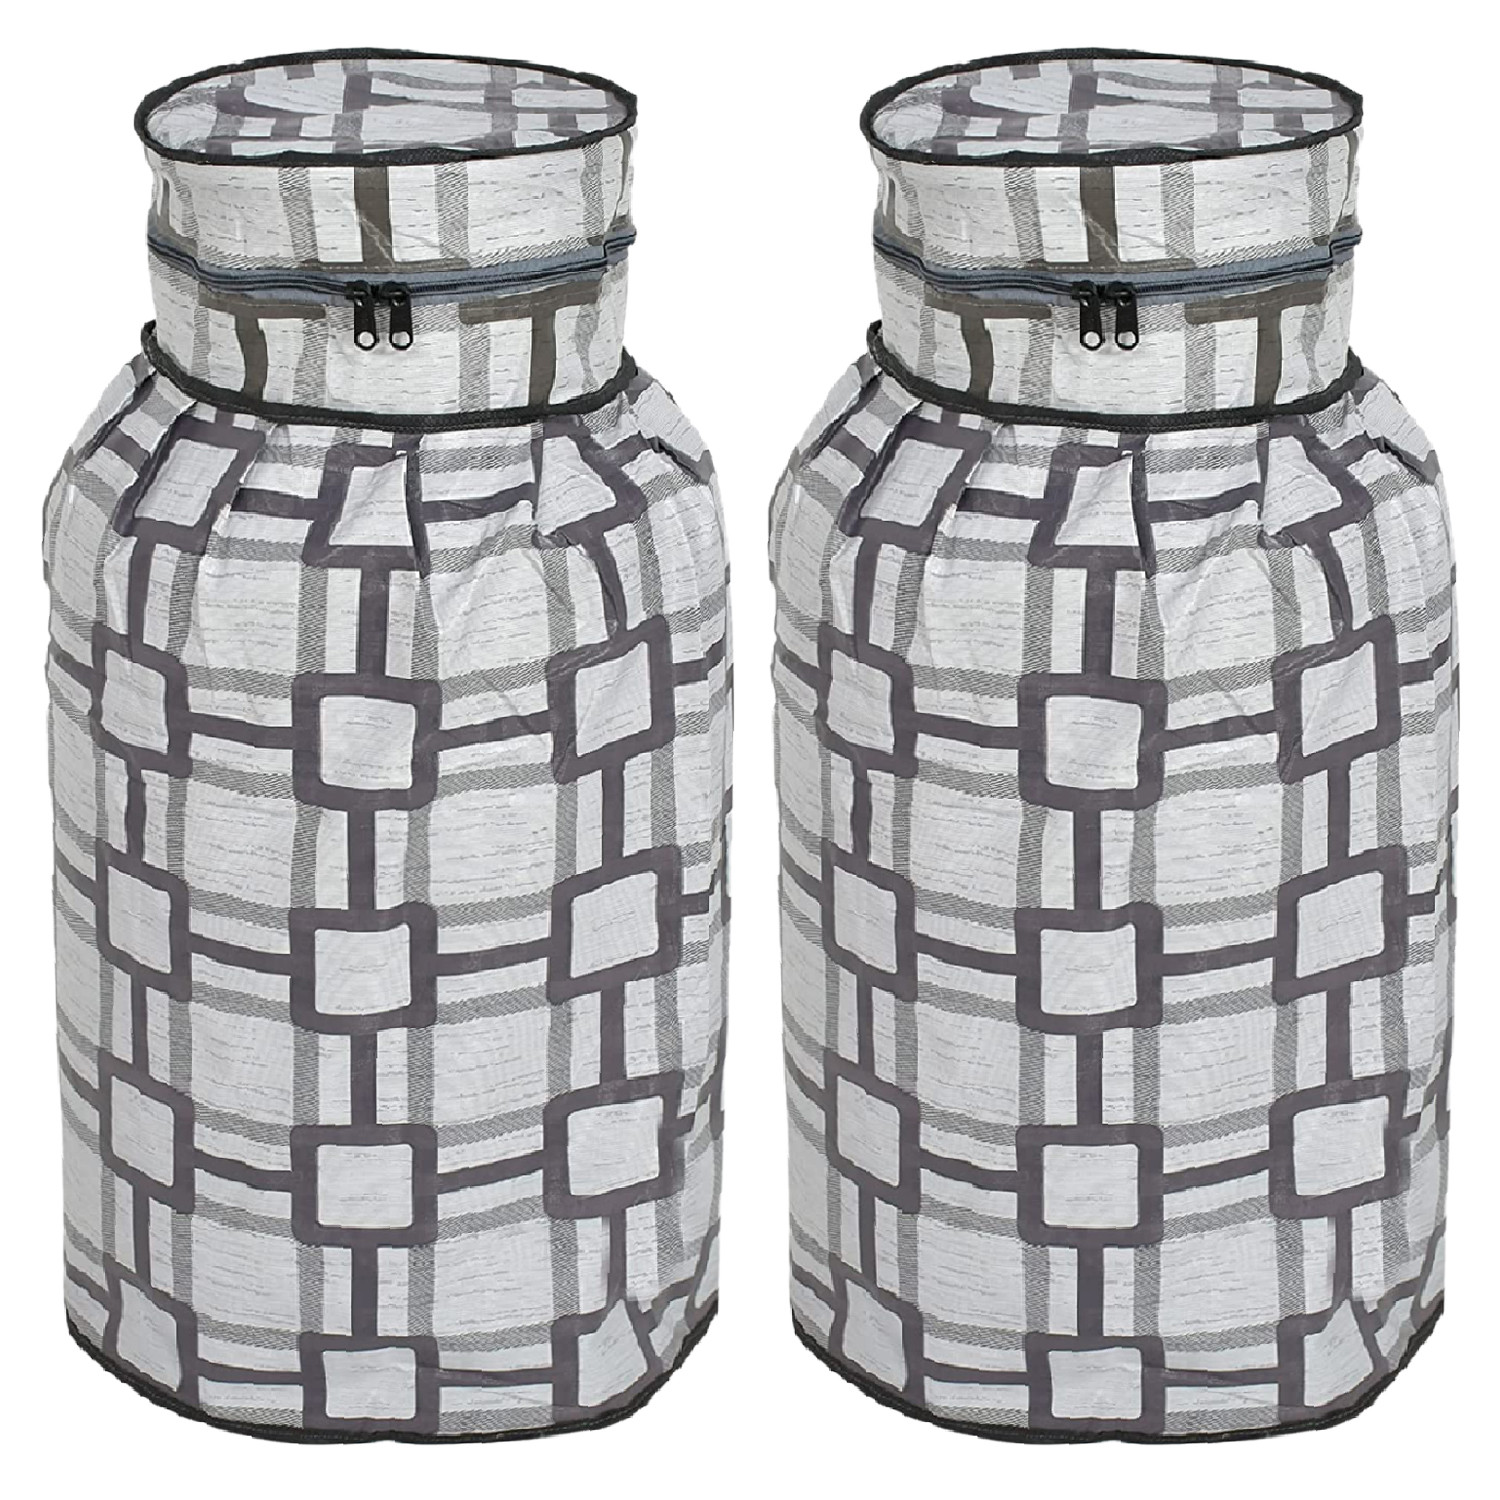 Kuber Industries PVC Square Print Waterproof and Dustproof Cylinder Cover For Home & Kitchen Pack of 2 (Grey)